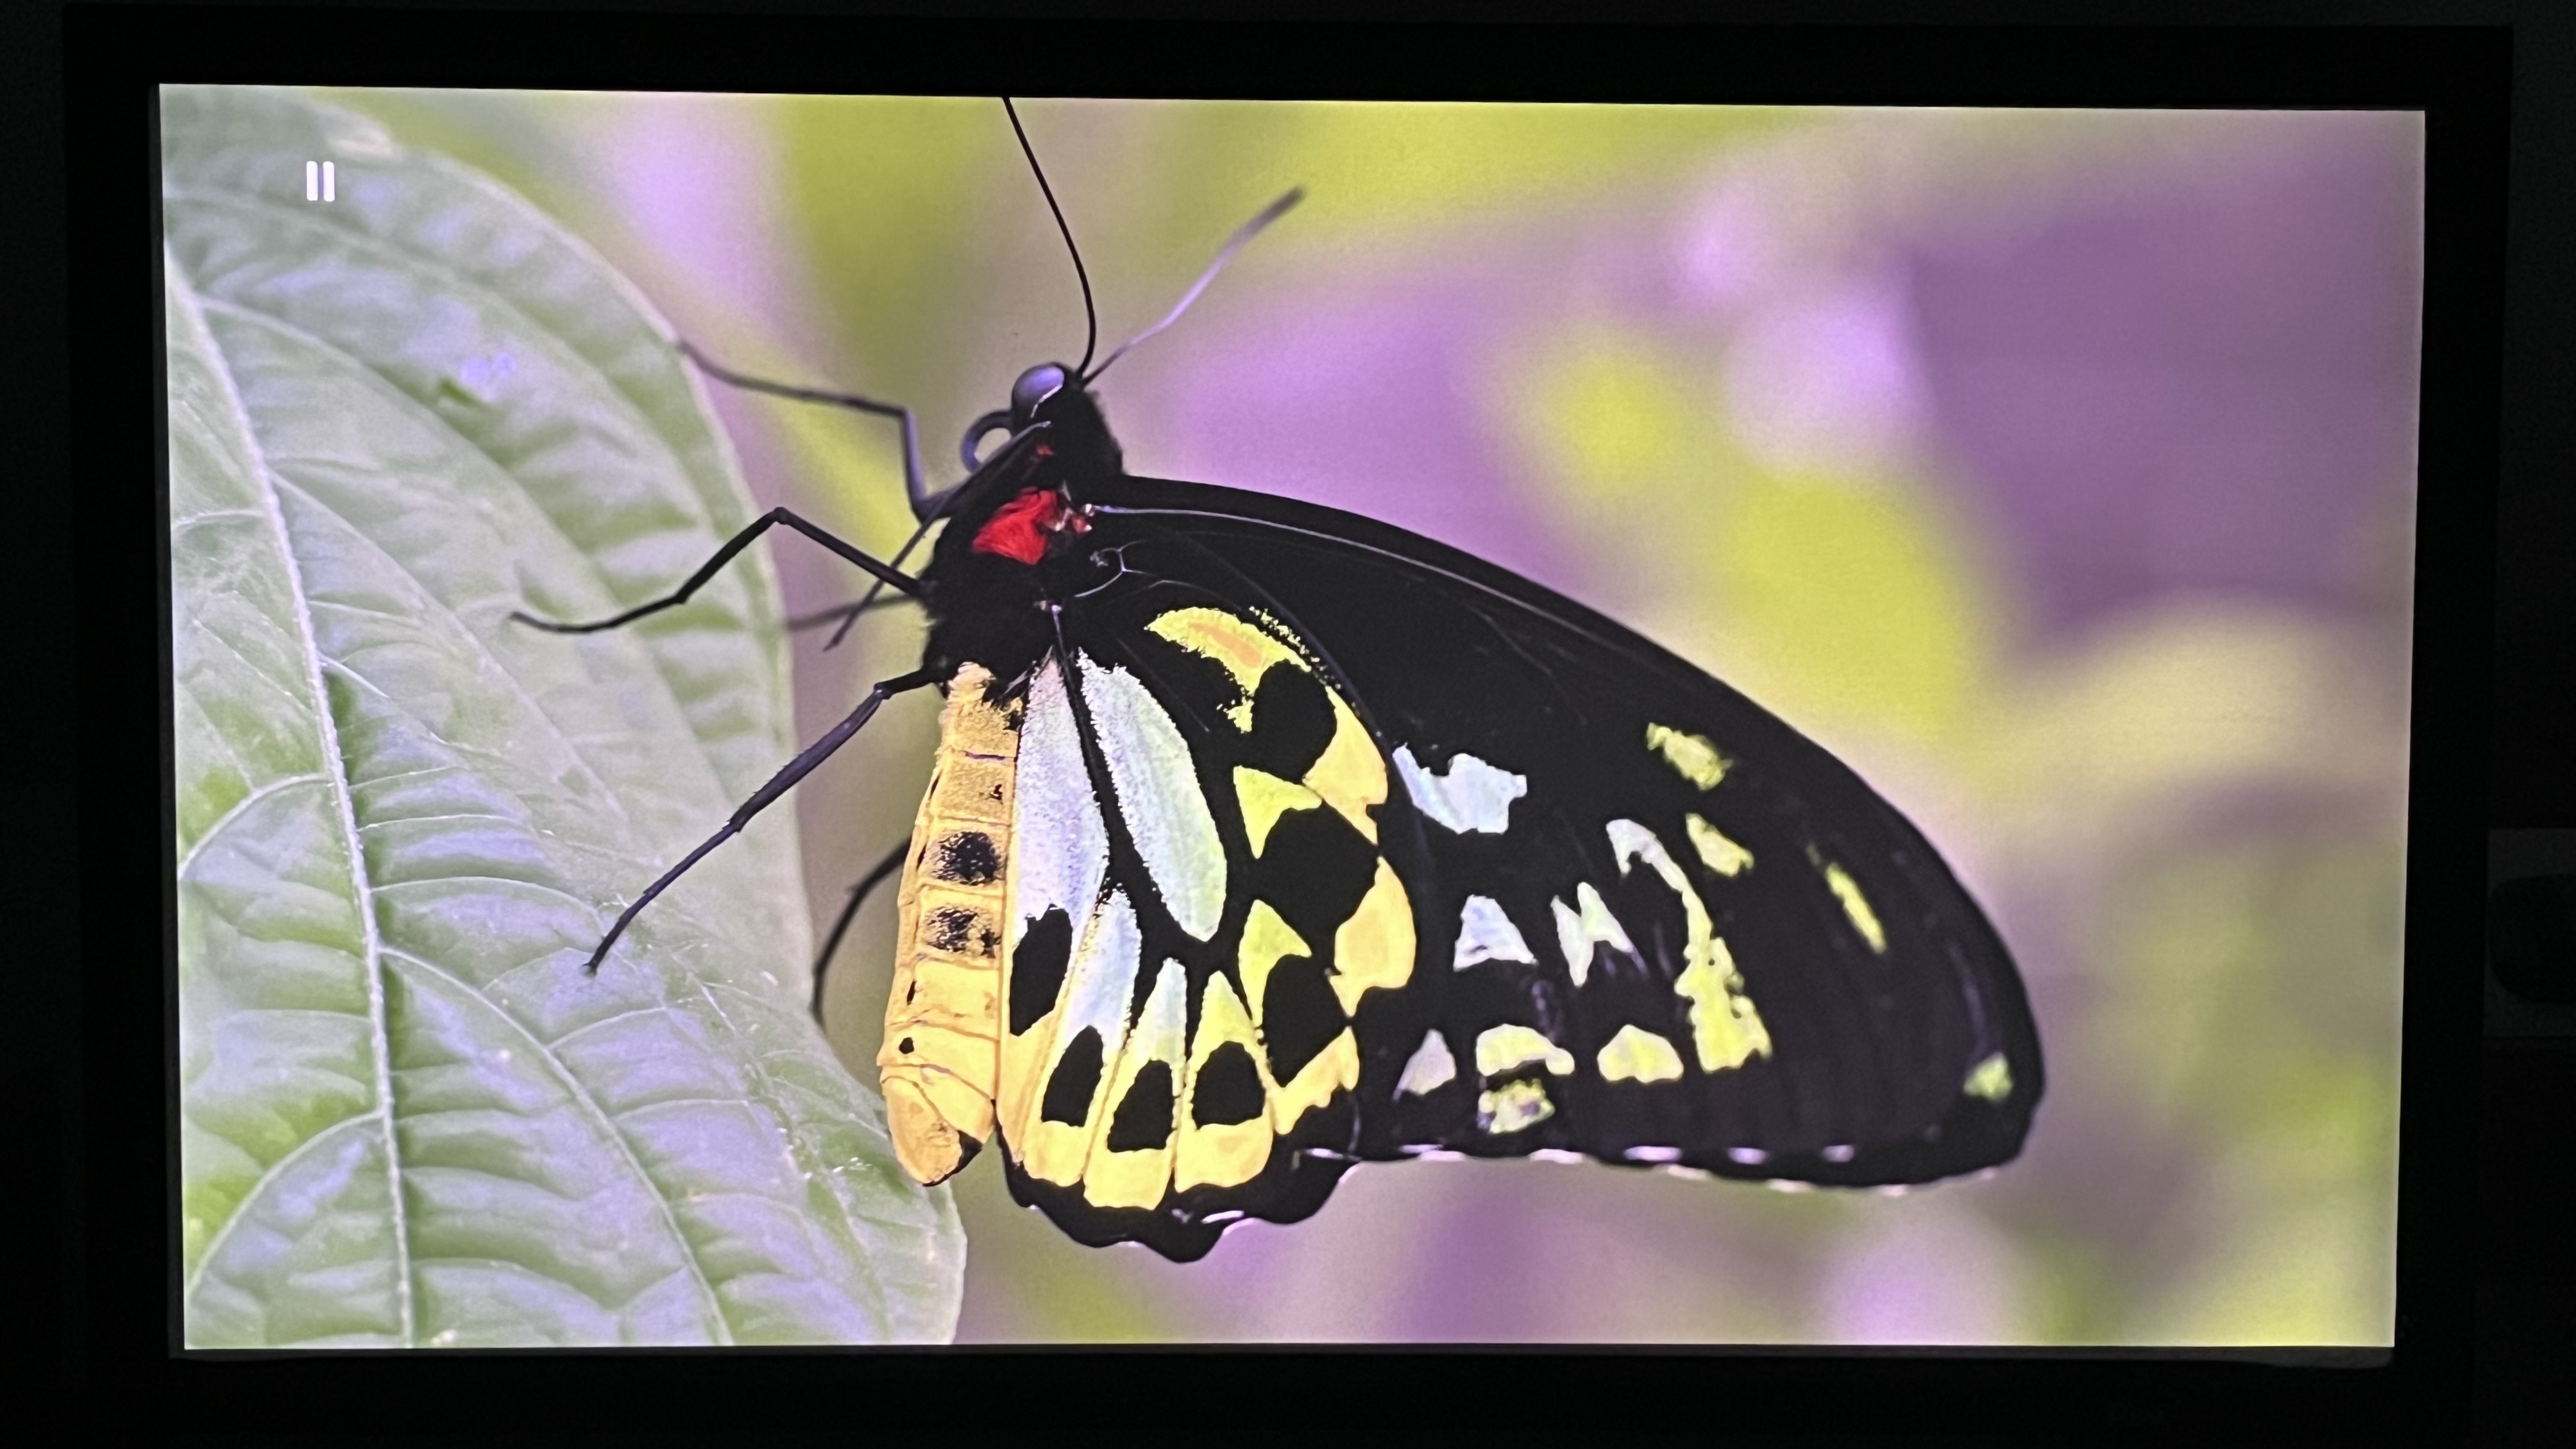 LG Cinebeam Q projector showing butterfly image on screen